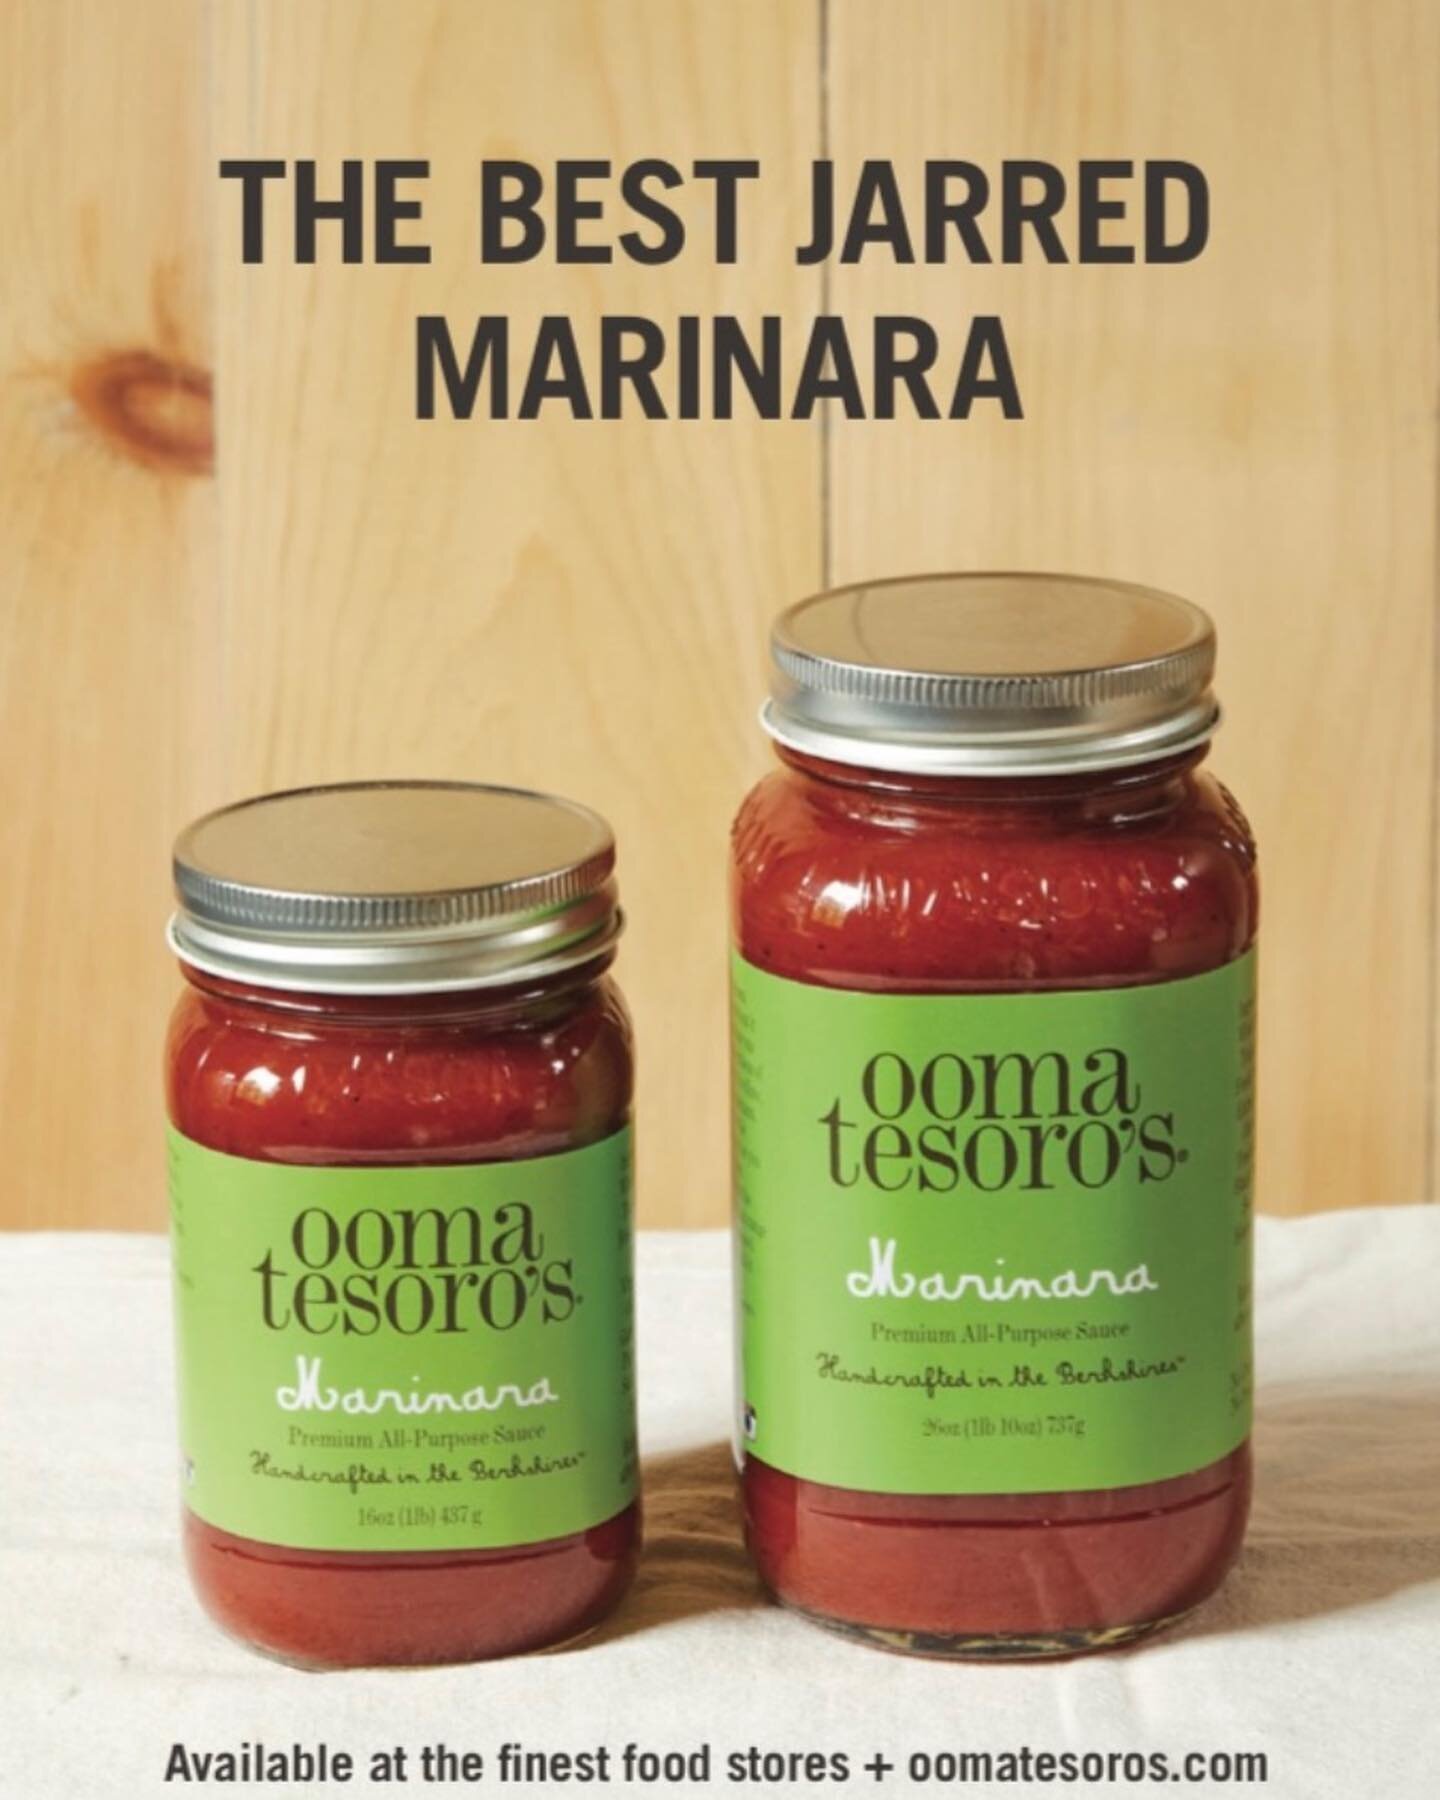 We make ONE sauce in a jar🫙🍅🍝 We do it right so you can trust that you&rsquo;re getting the best of the best. This is the jar of marinara you have been searching for! Take 15% off our website with coupon: OOMA15 #bestjarredmarinara #bestmarinara #